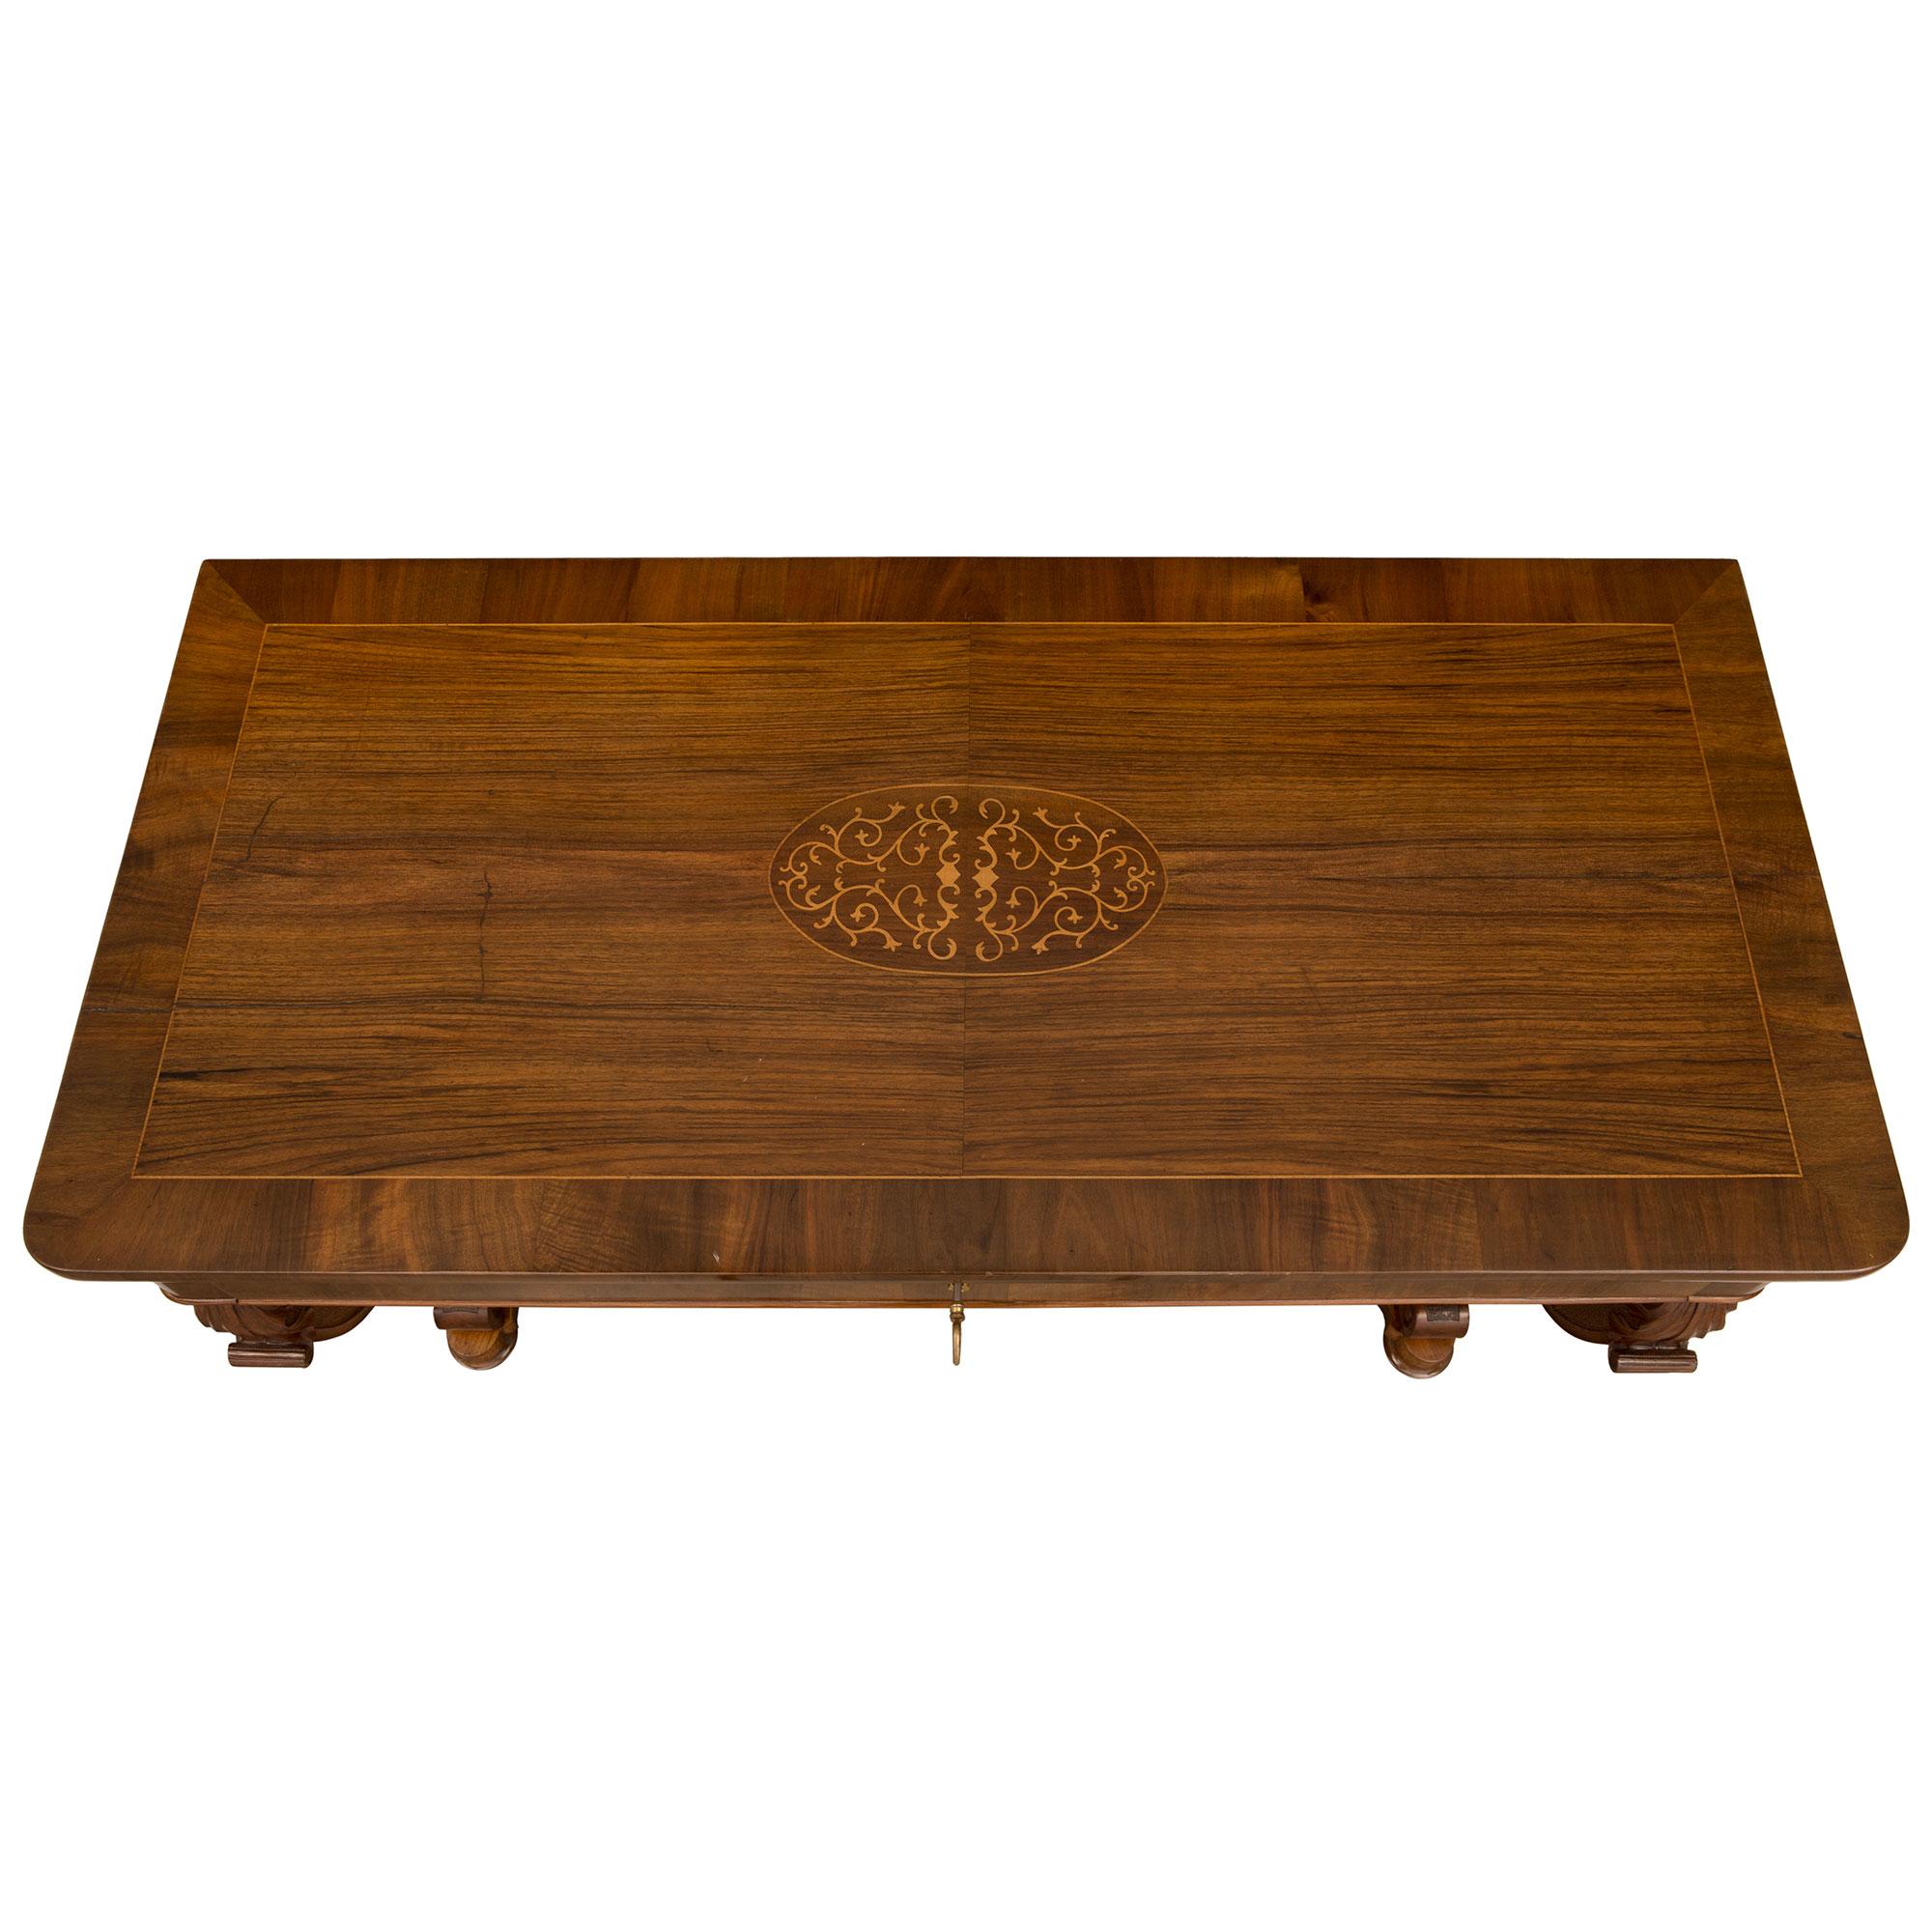 An outstanding and unique pair of Italian 19th century Charles X st. walnut, maple wood and ormolu consoles. Each console is raised by fine bun feet below the elegant veneered bottom tier which showcases the beautiful walnut grain and displays a